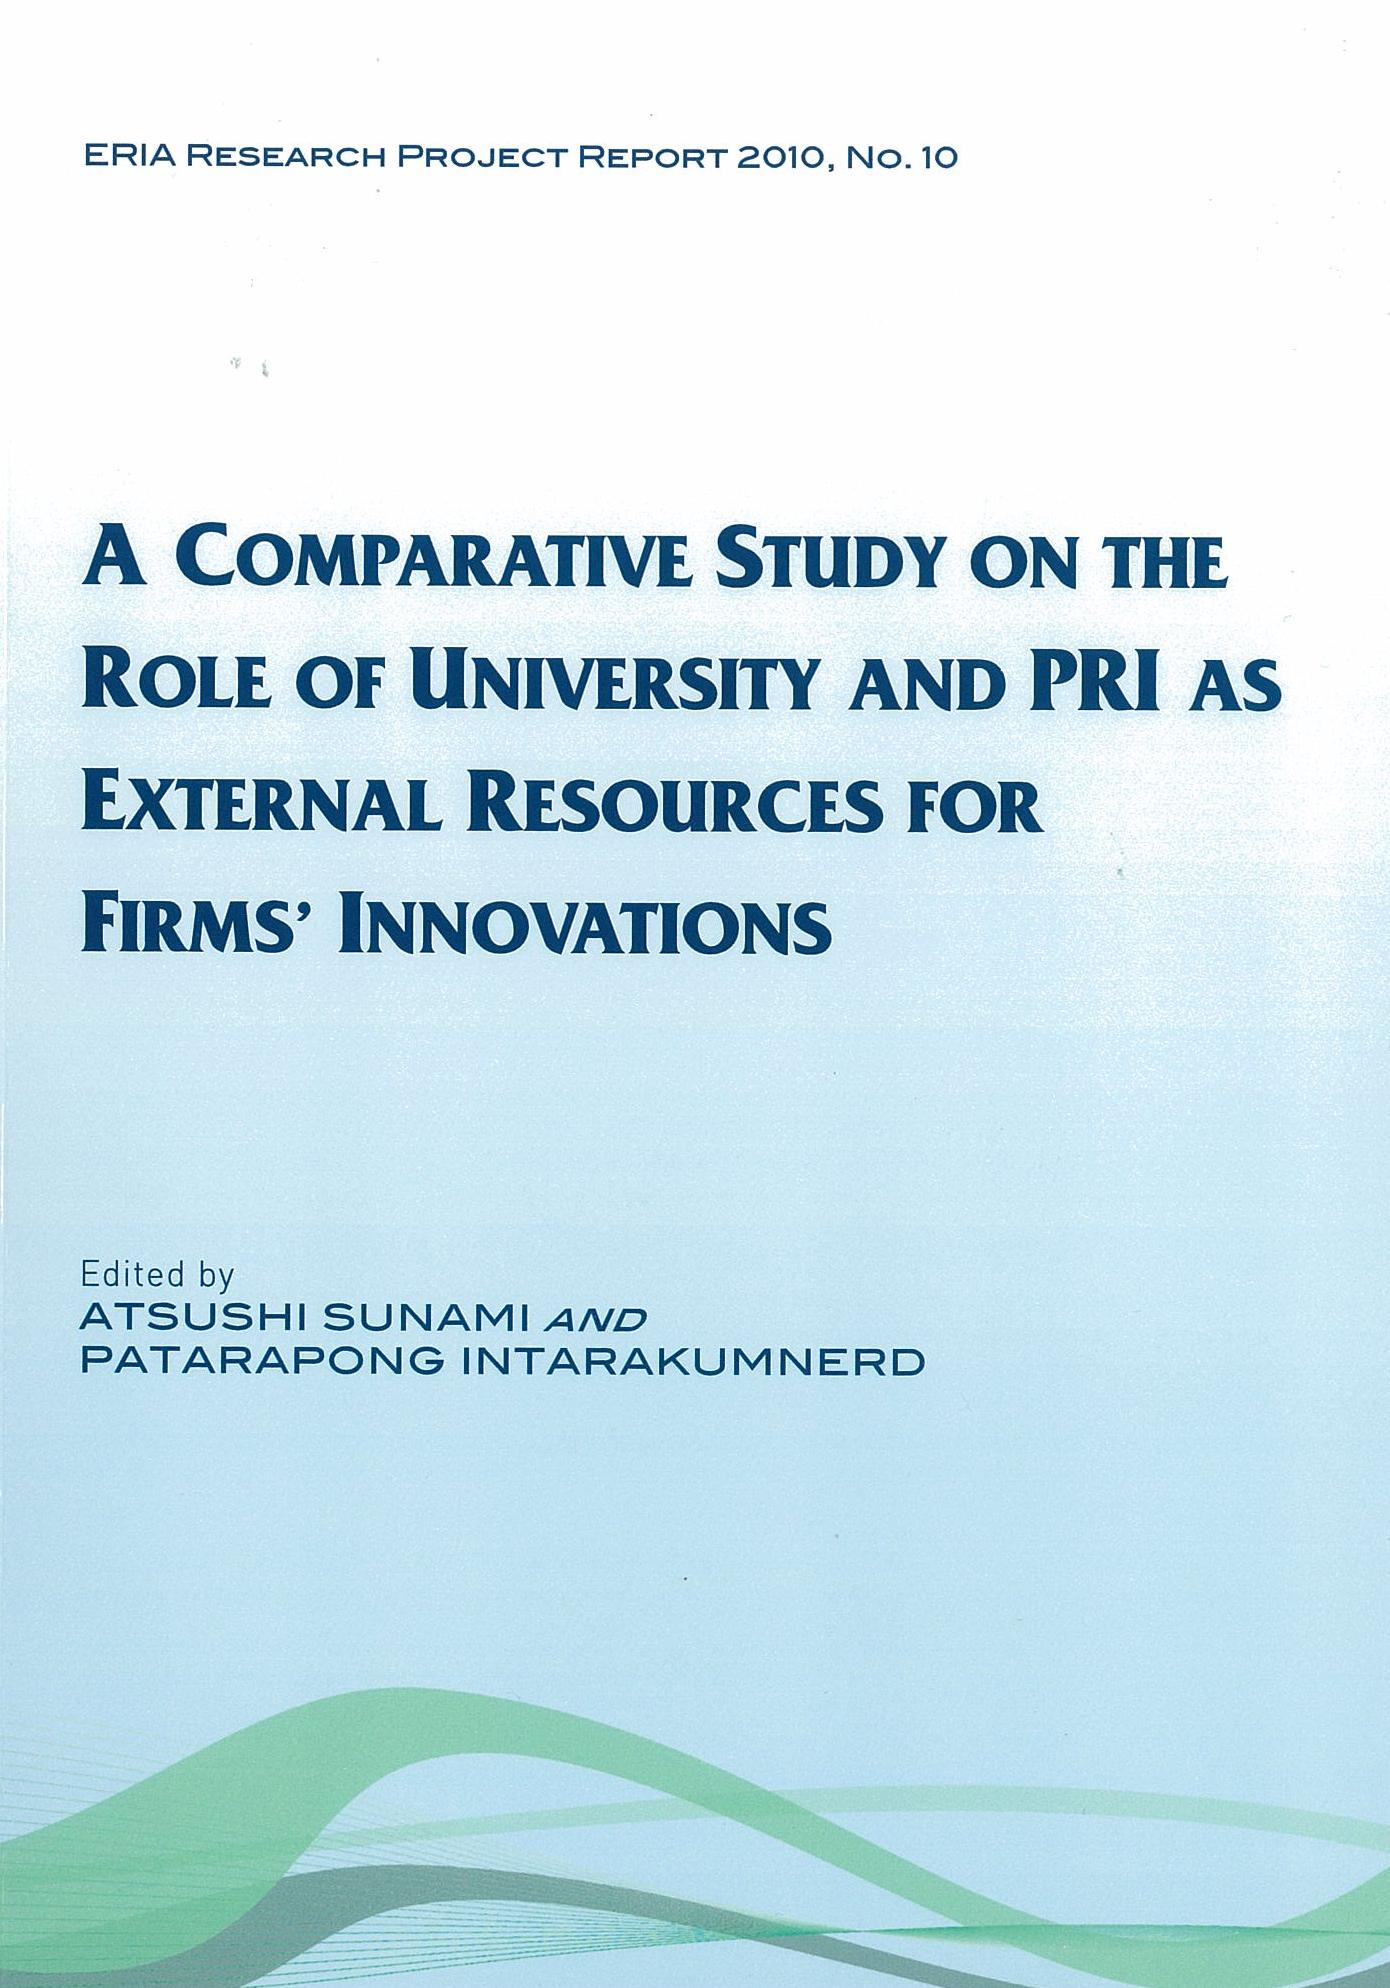 A Comparative Study on the Role of University and PRI as External Resources for Firms' Innovation